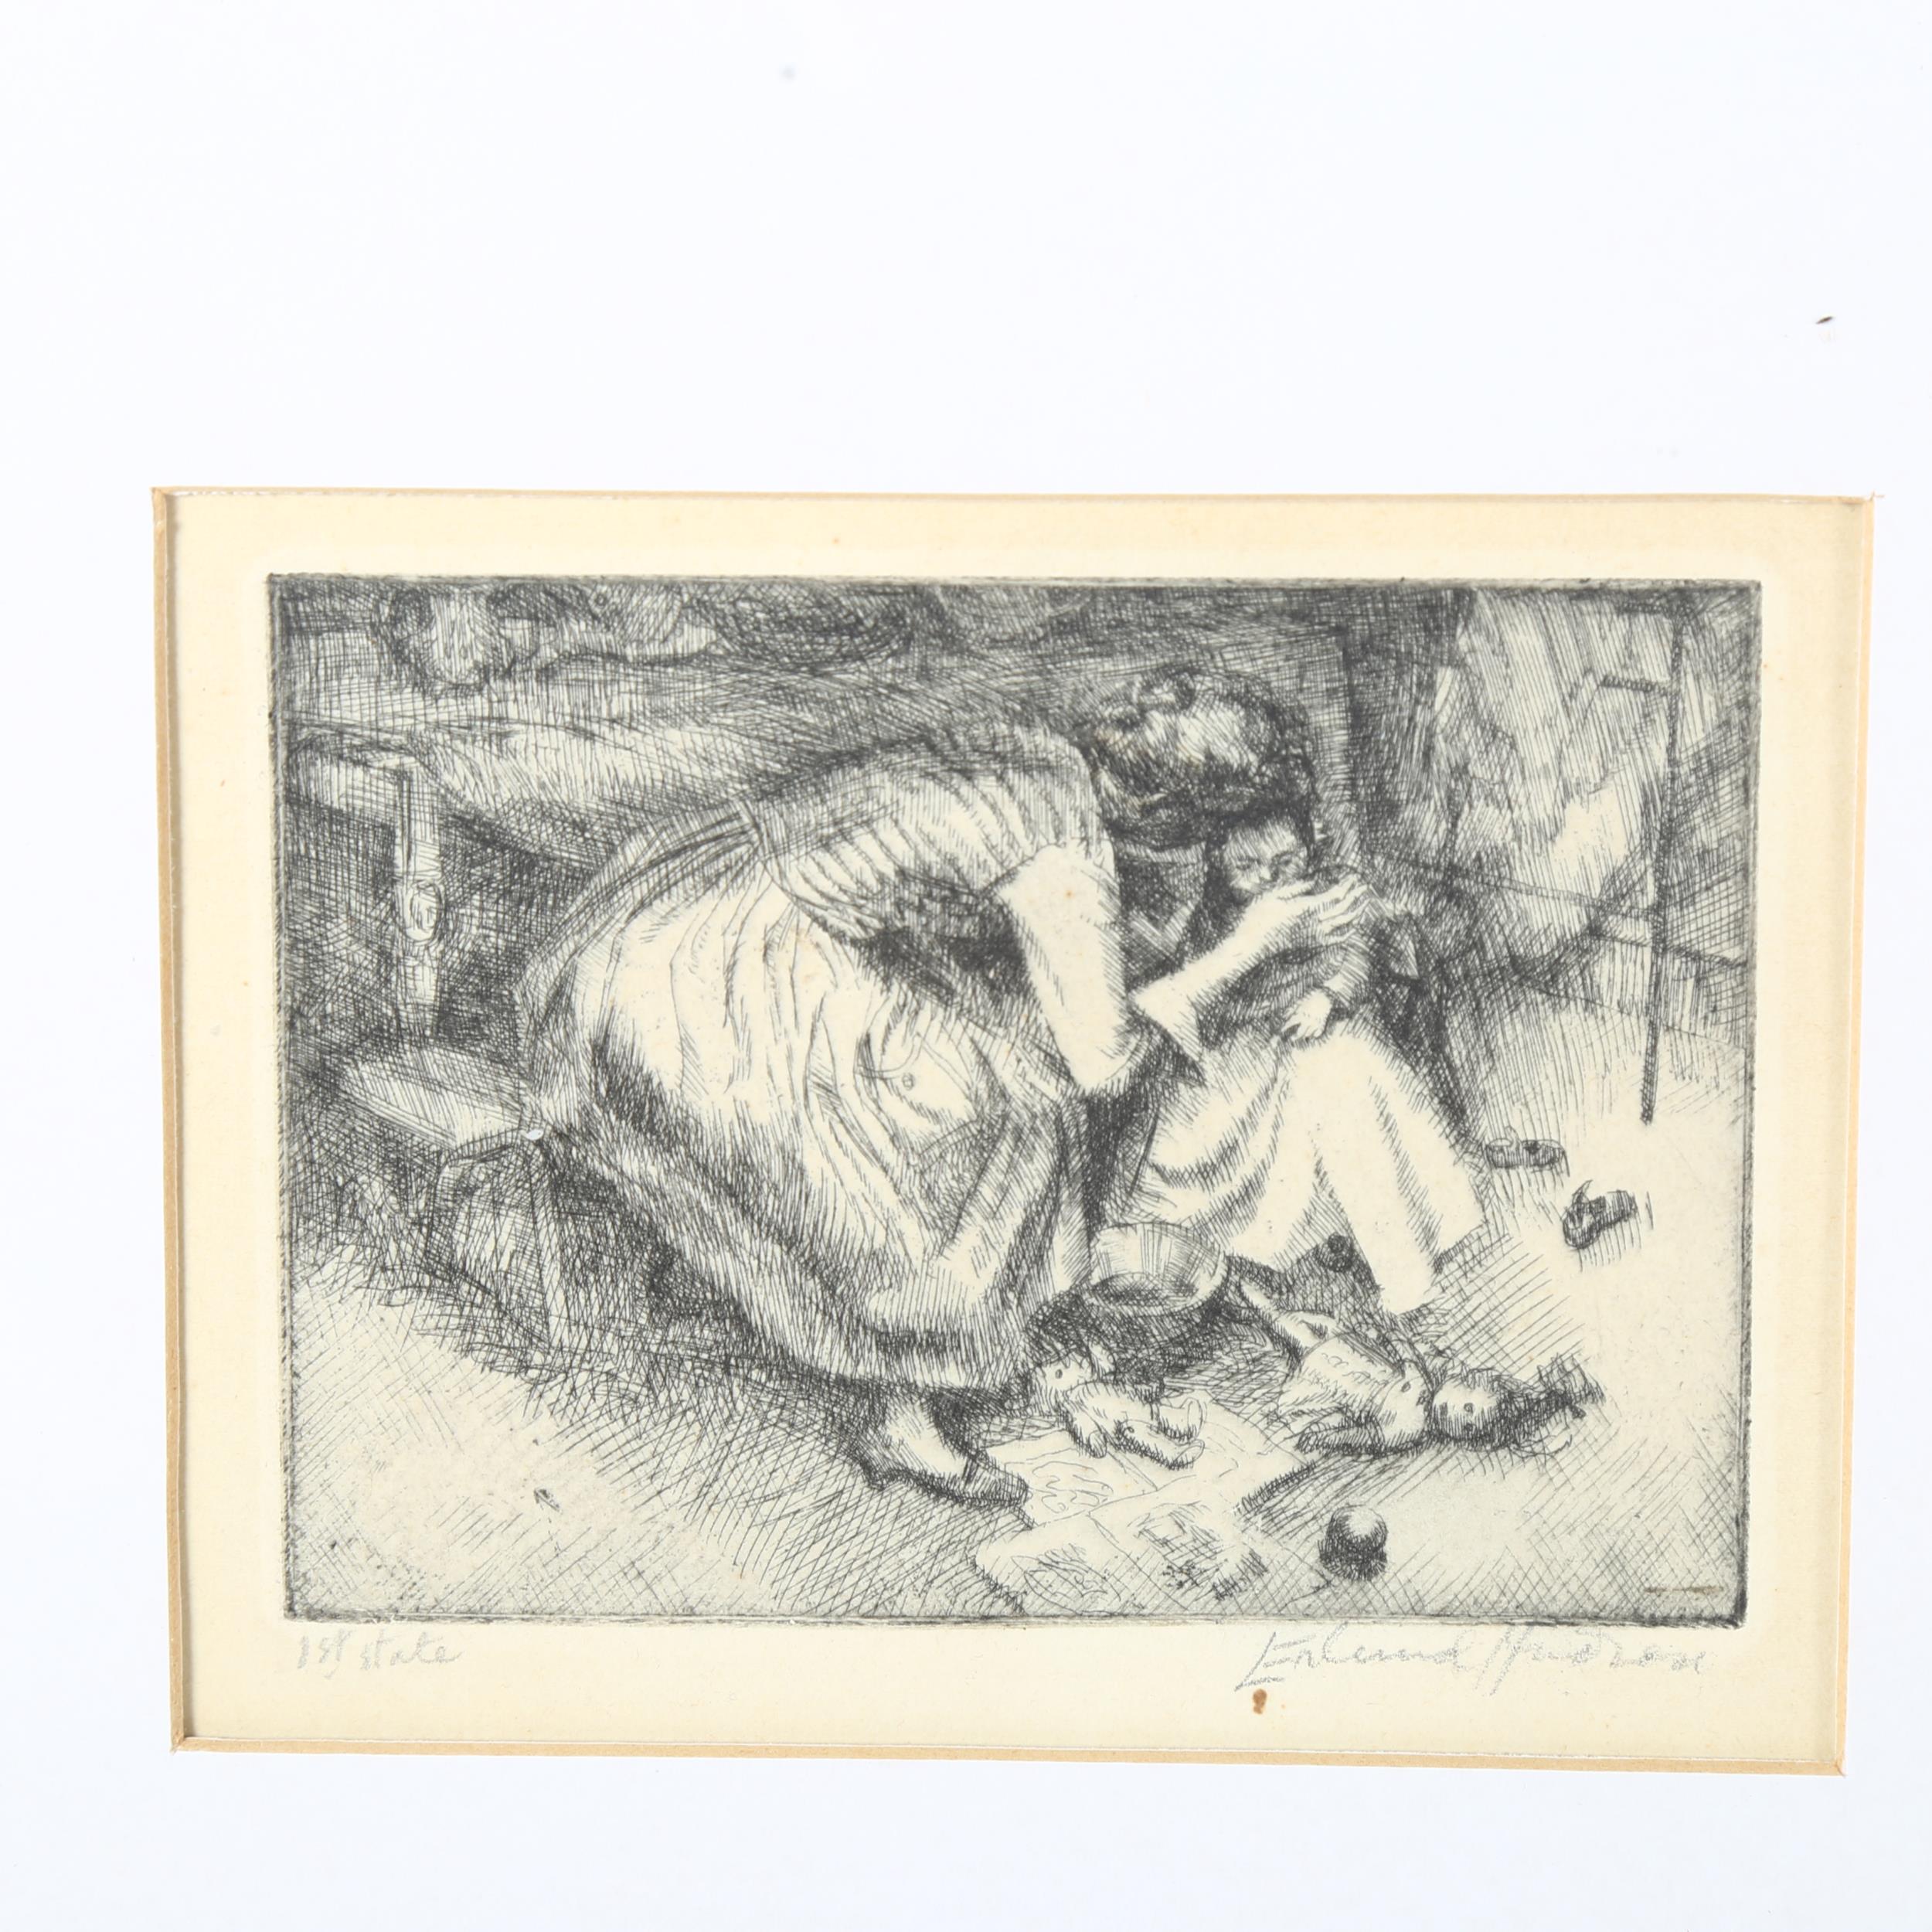 Erlund Hudson (1912 - 2011), 3 engravings, interior scenes, all signed in pencil, image10cm x - Image 2 of 2